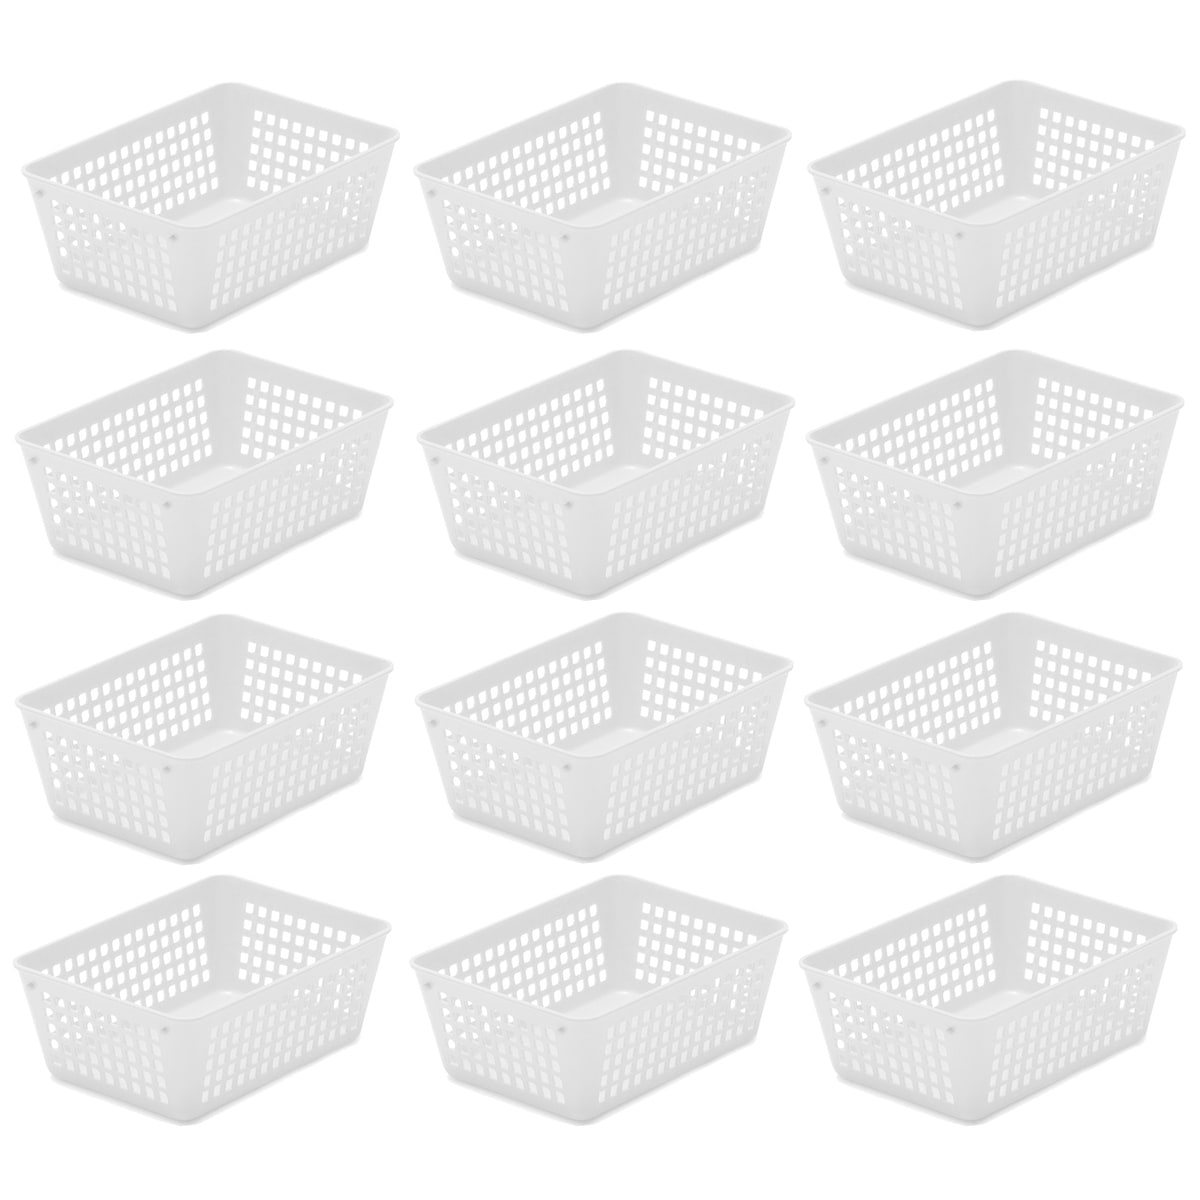 https://ak1.ostkcdn.com/images/products/is/images/direct/d205d2fb144d37e3906cb54e11bbfcf7c3730e3a/12-Pack-Plastic-Storage-Baskets-for-Office-Drawer%2C-Classroom-Desk.jpg